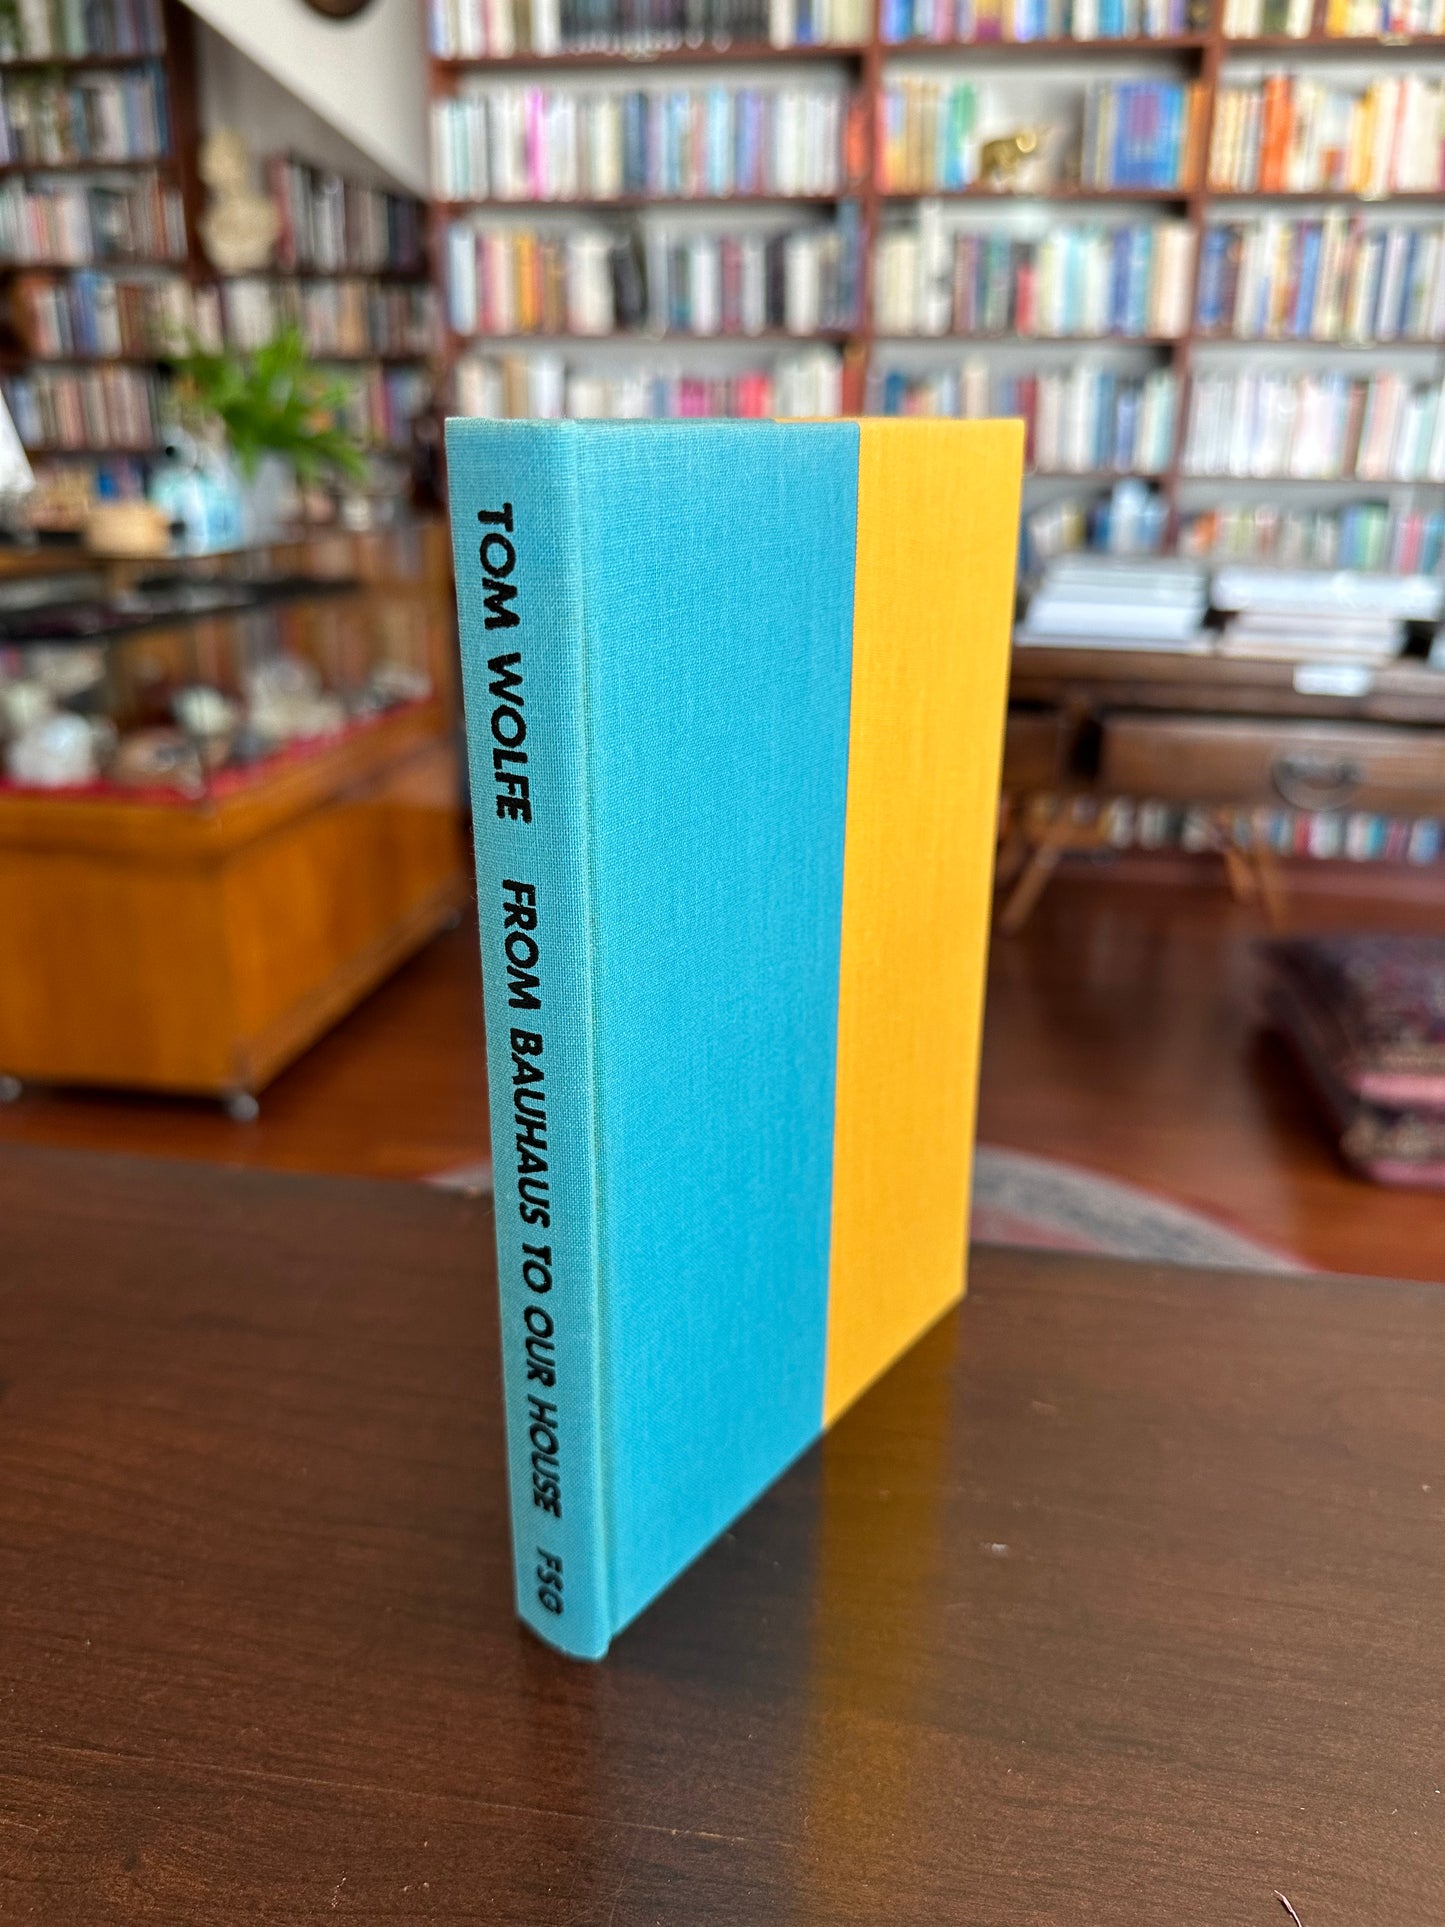 From Bauhaus to Our House by Tom Wolfe (First Edition)